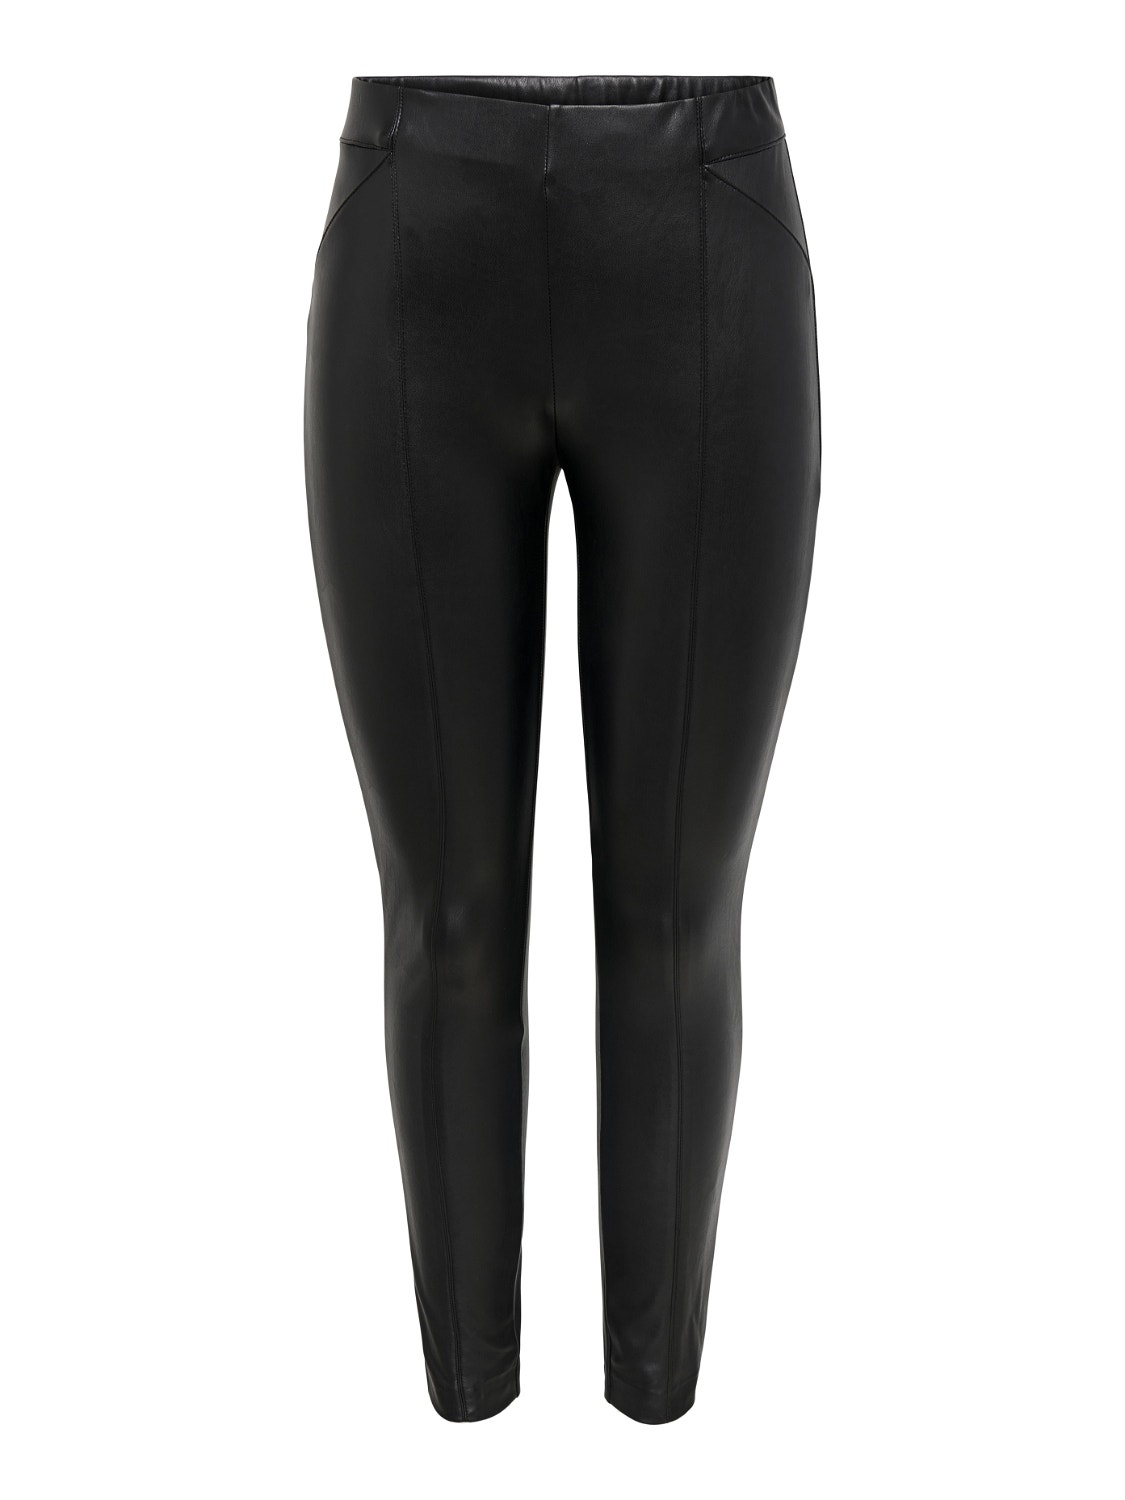 Only, Faux Leather Leggings Ladies, Preto